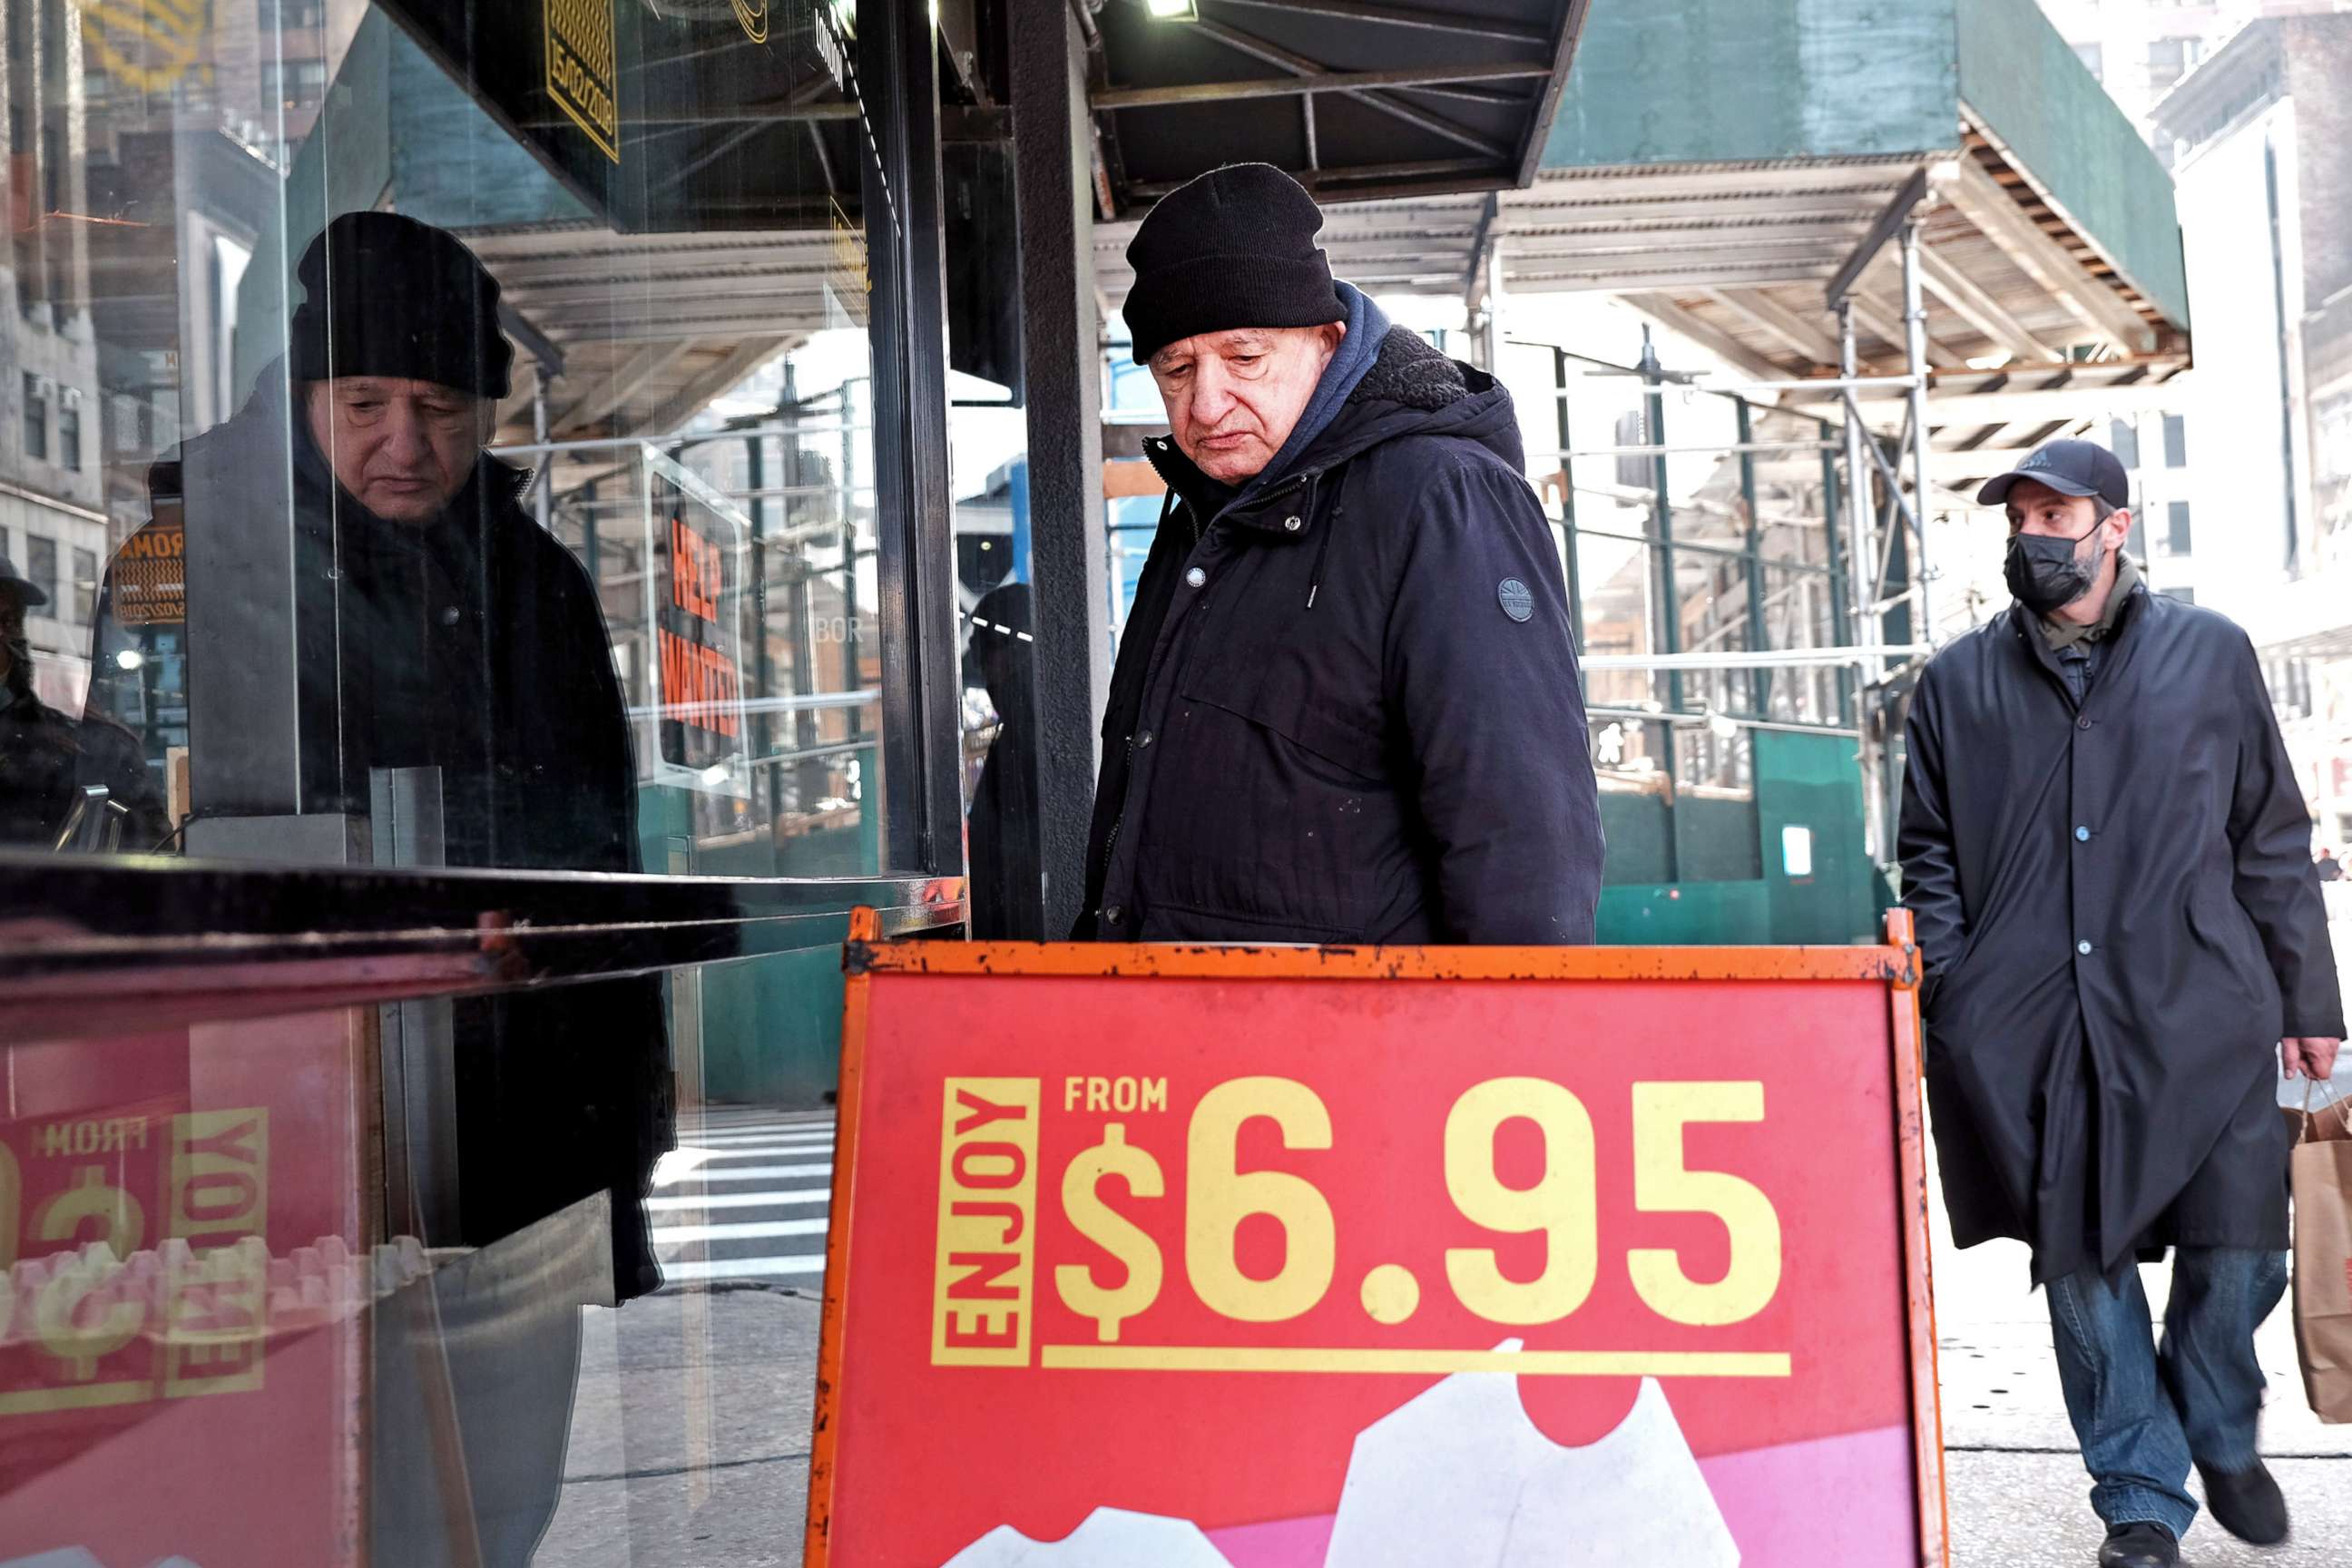 PHOTO: Prices are displayed outside of a Manhattan business on Jan. 12, 2022 in New York City. Newly released data shows that inflation growth, as prices rose on everything from gas to furniture for American shoppers.